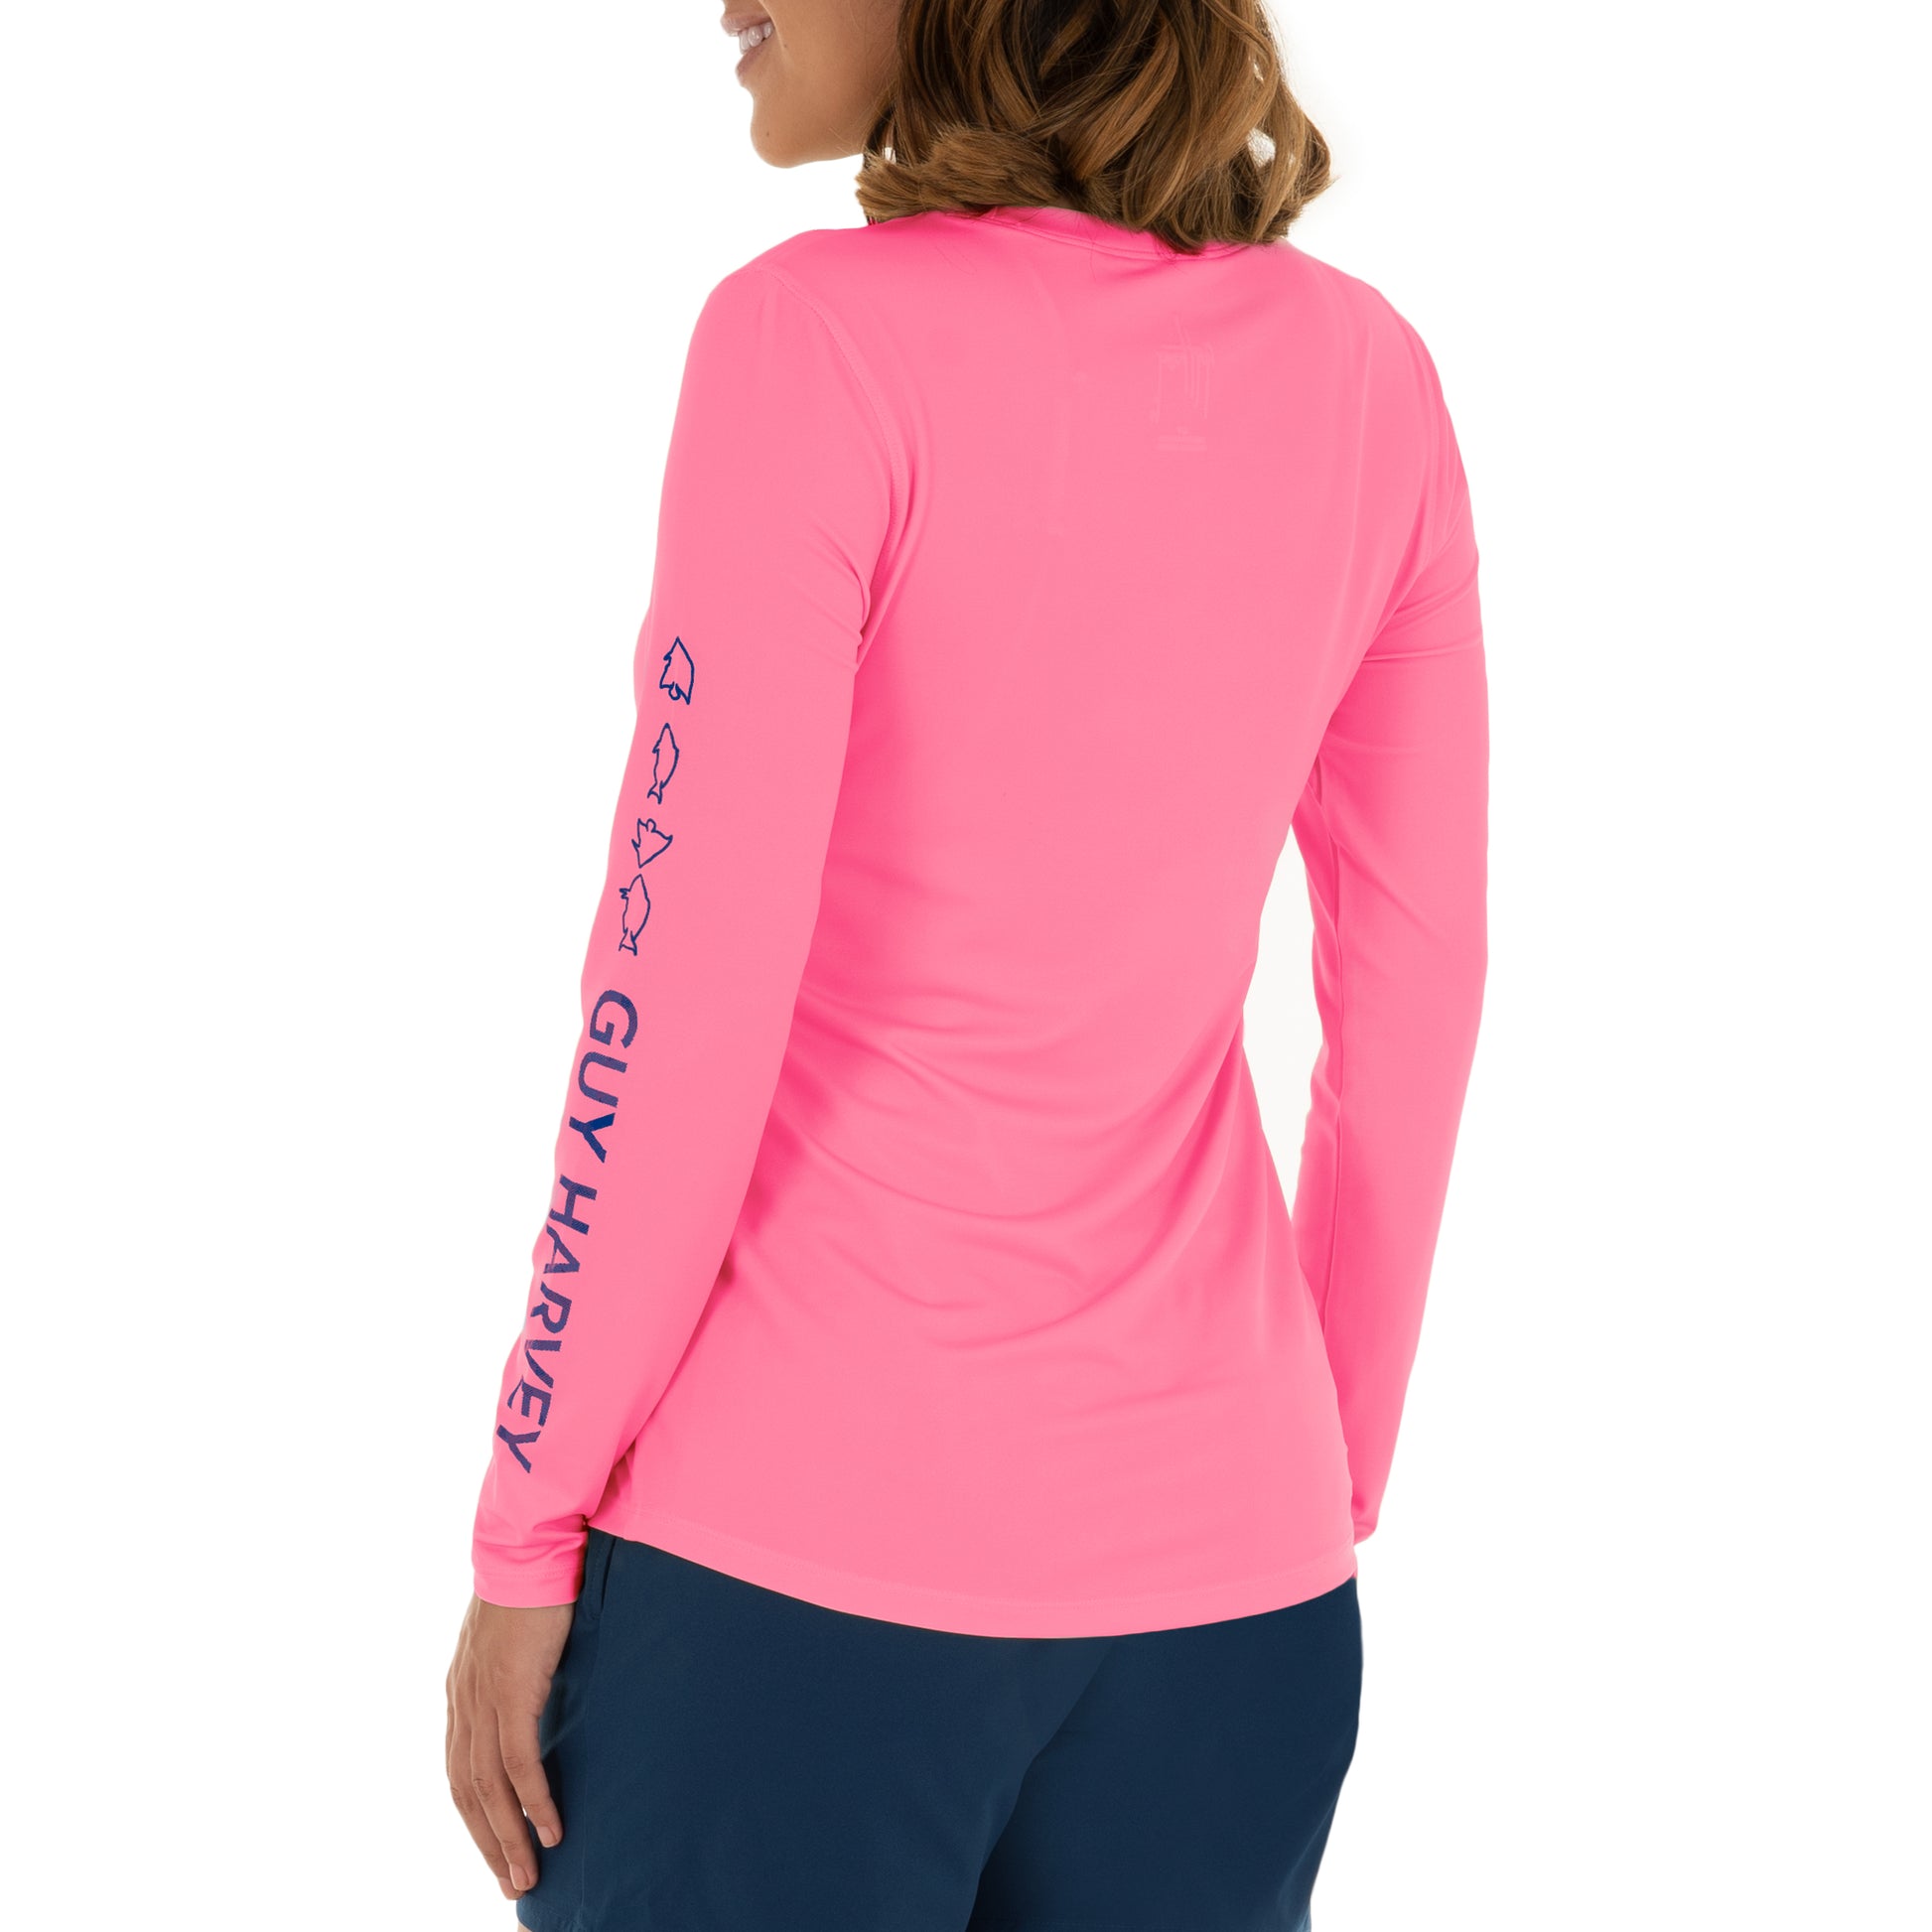 Ladies Core Solid Pink Sun Protection Top View 2